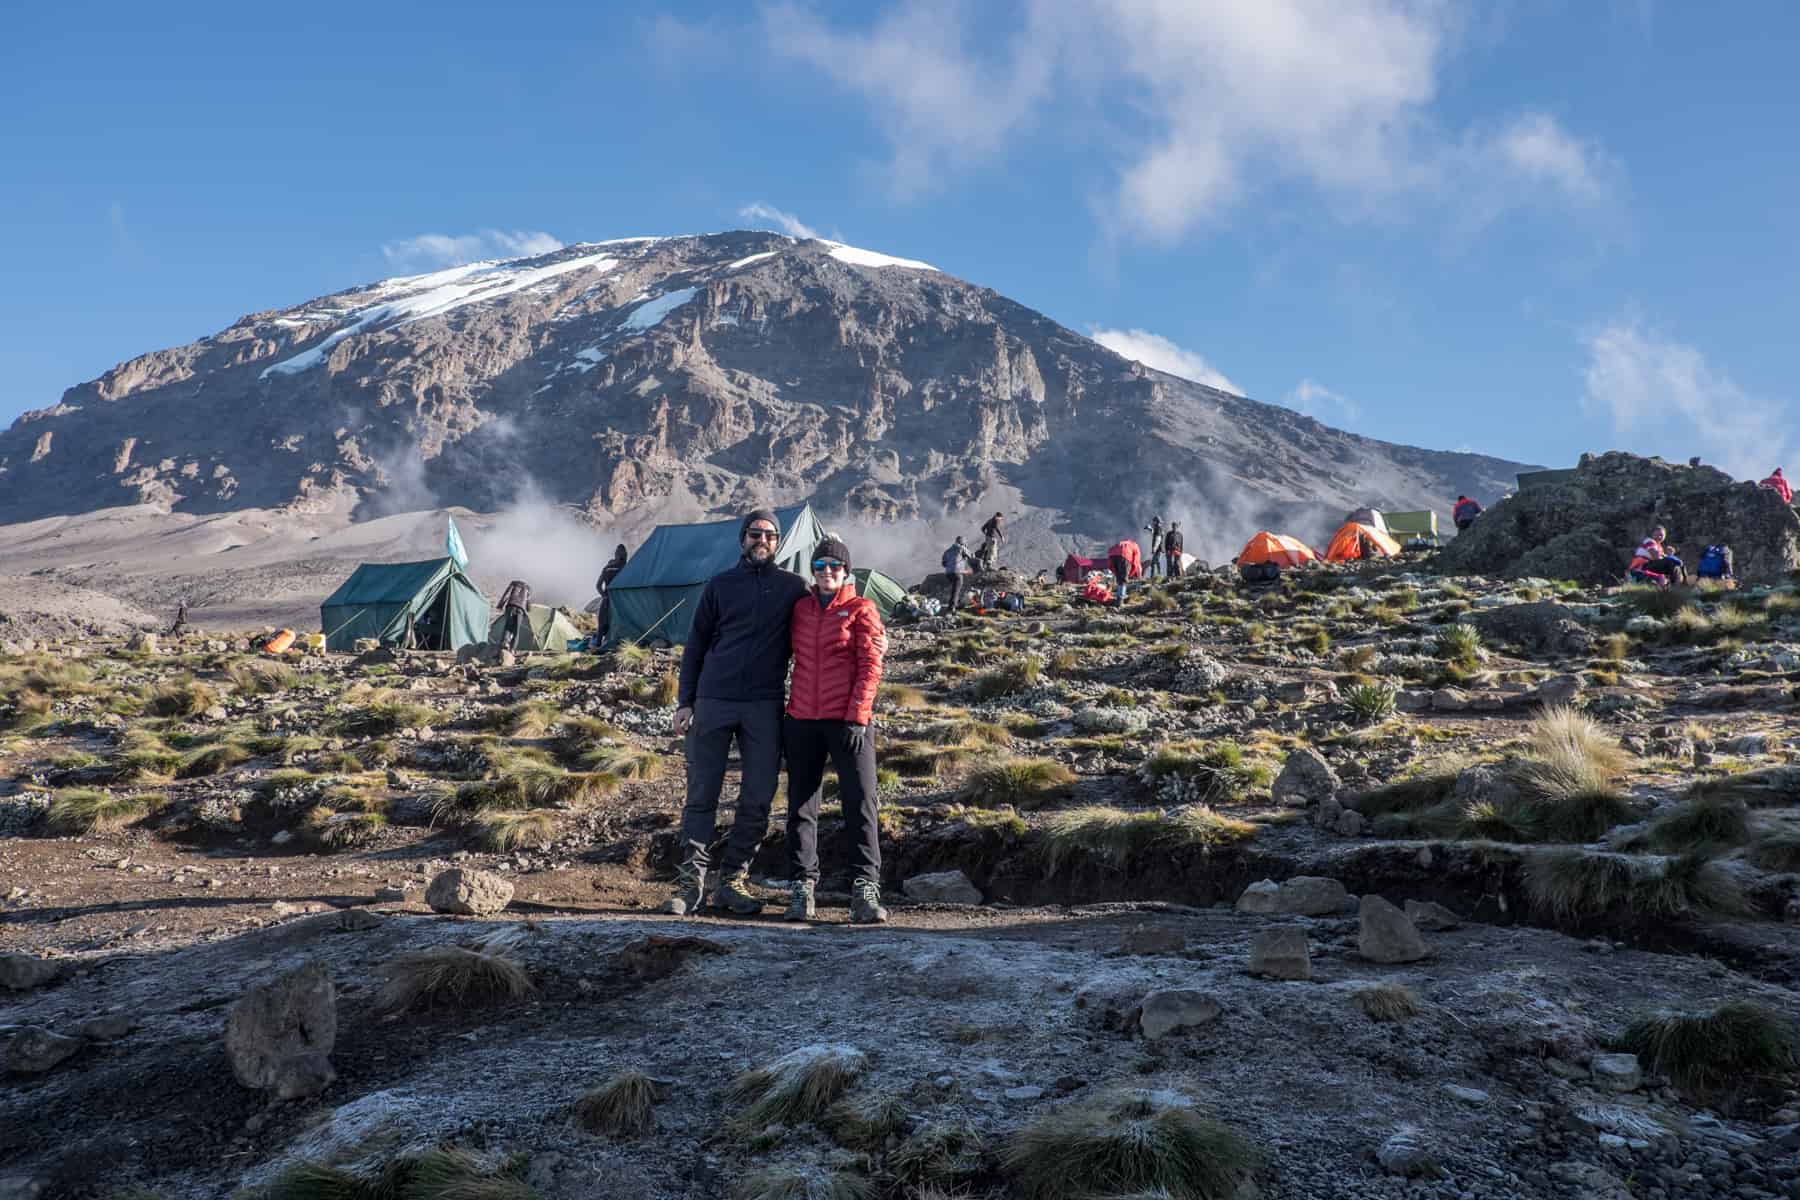 A man and woman stand together in front of a camp of green and orange tents, with the snow capped Mount Kilimanjaro behind.